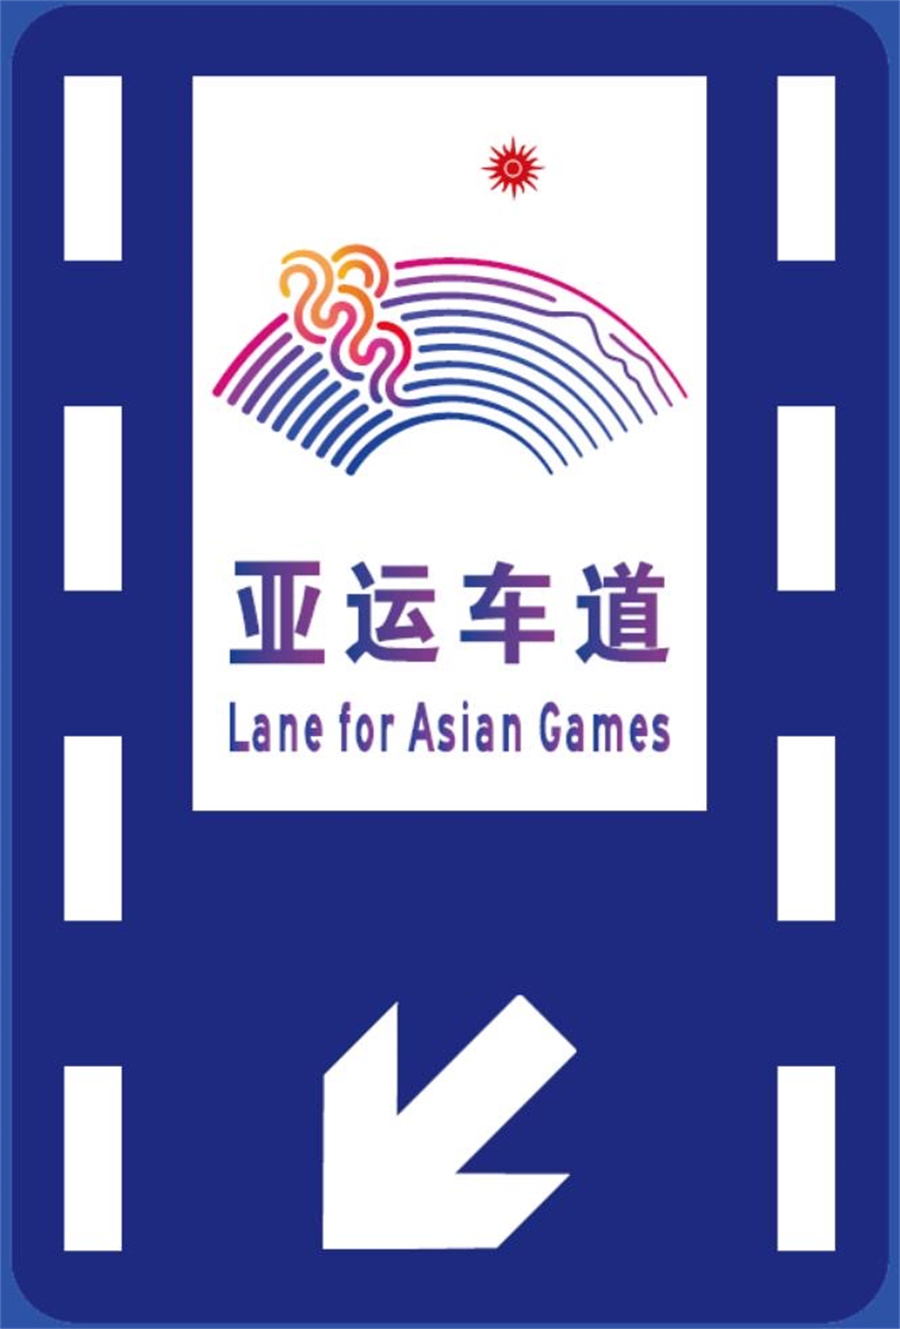 Asian Games lanes will be open only to accredited Hangzhou 2022 athletes and officials ©Hangzhou 2022